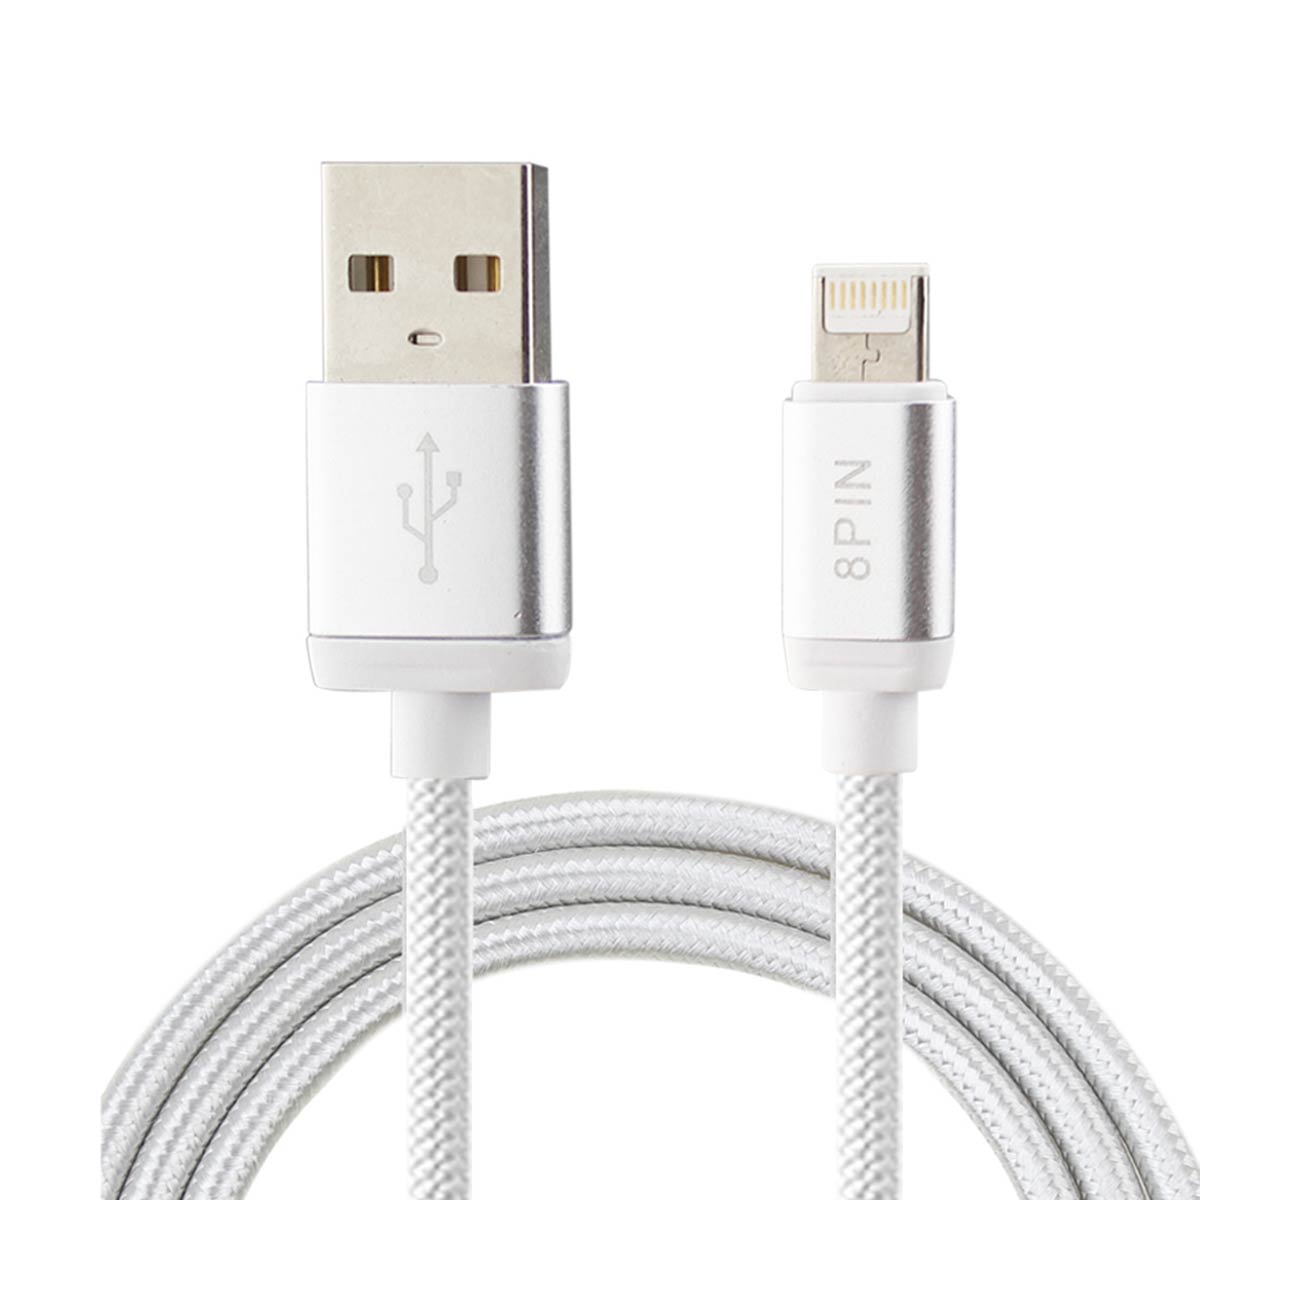 Cable USB Micro Reversible 8-PIN 2-In-1 Reiko Nylon Braided 3.3Ft White Color